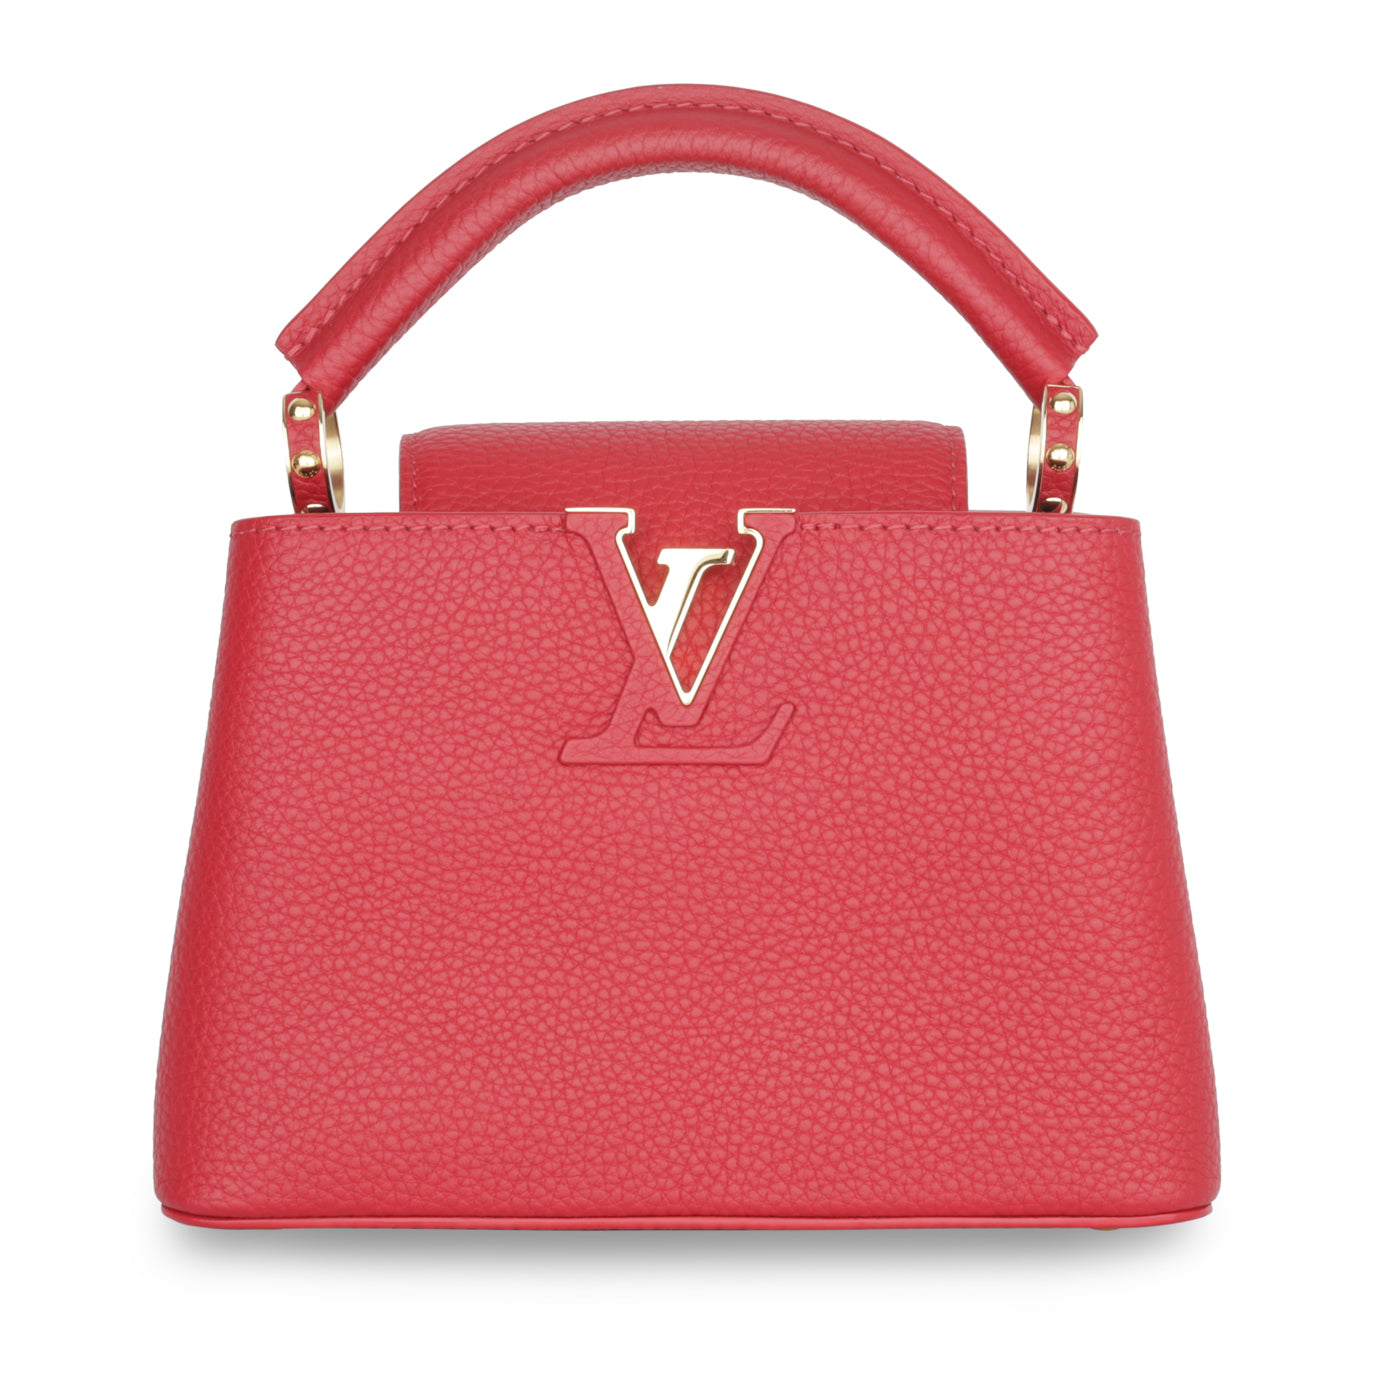 LV Capucines Mini in Red with GHW